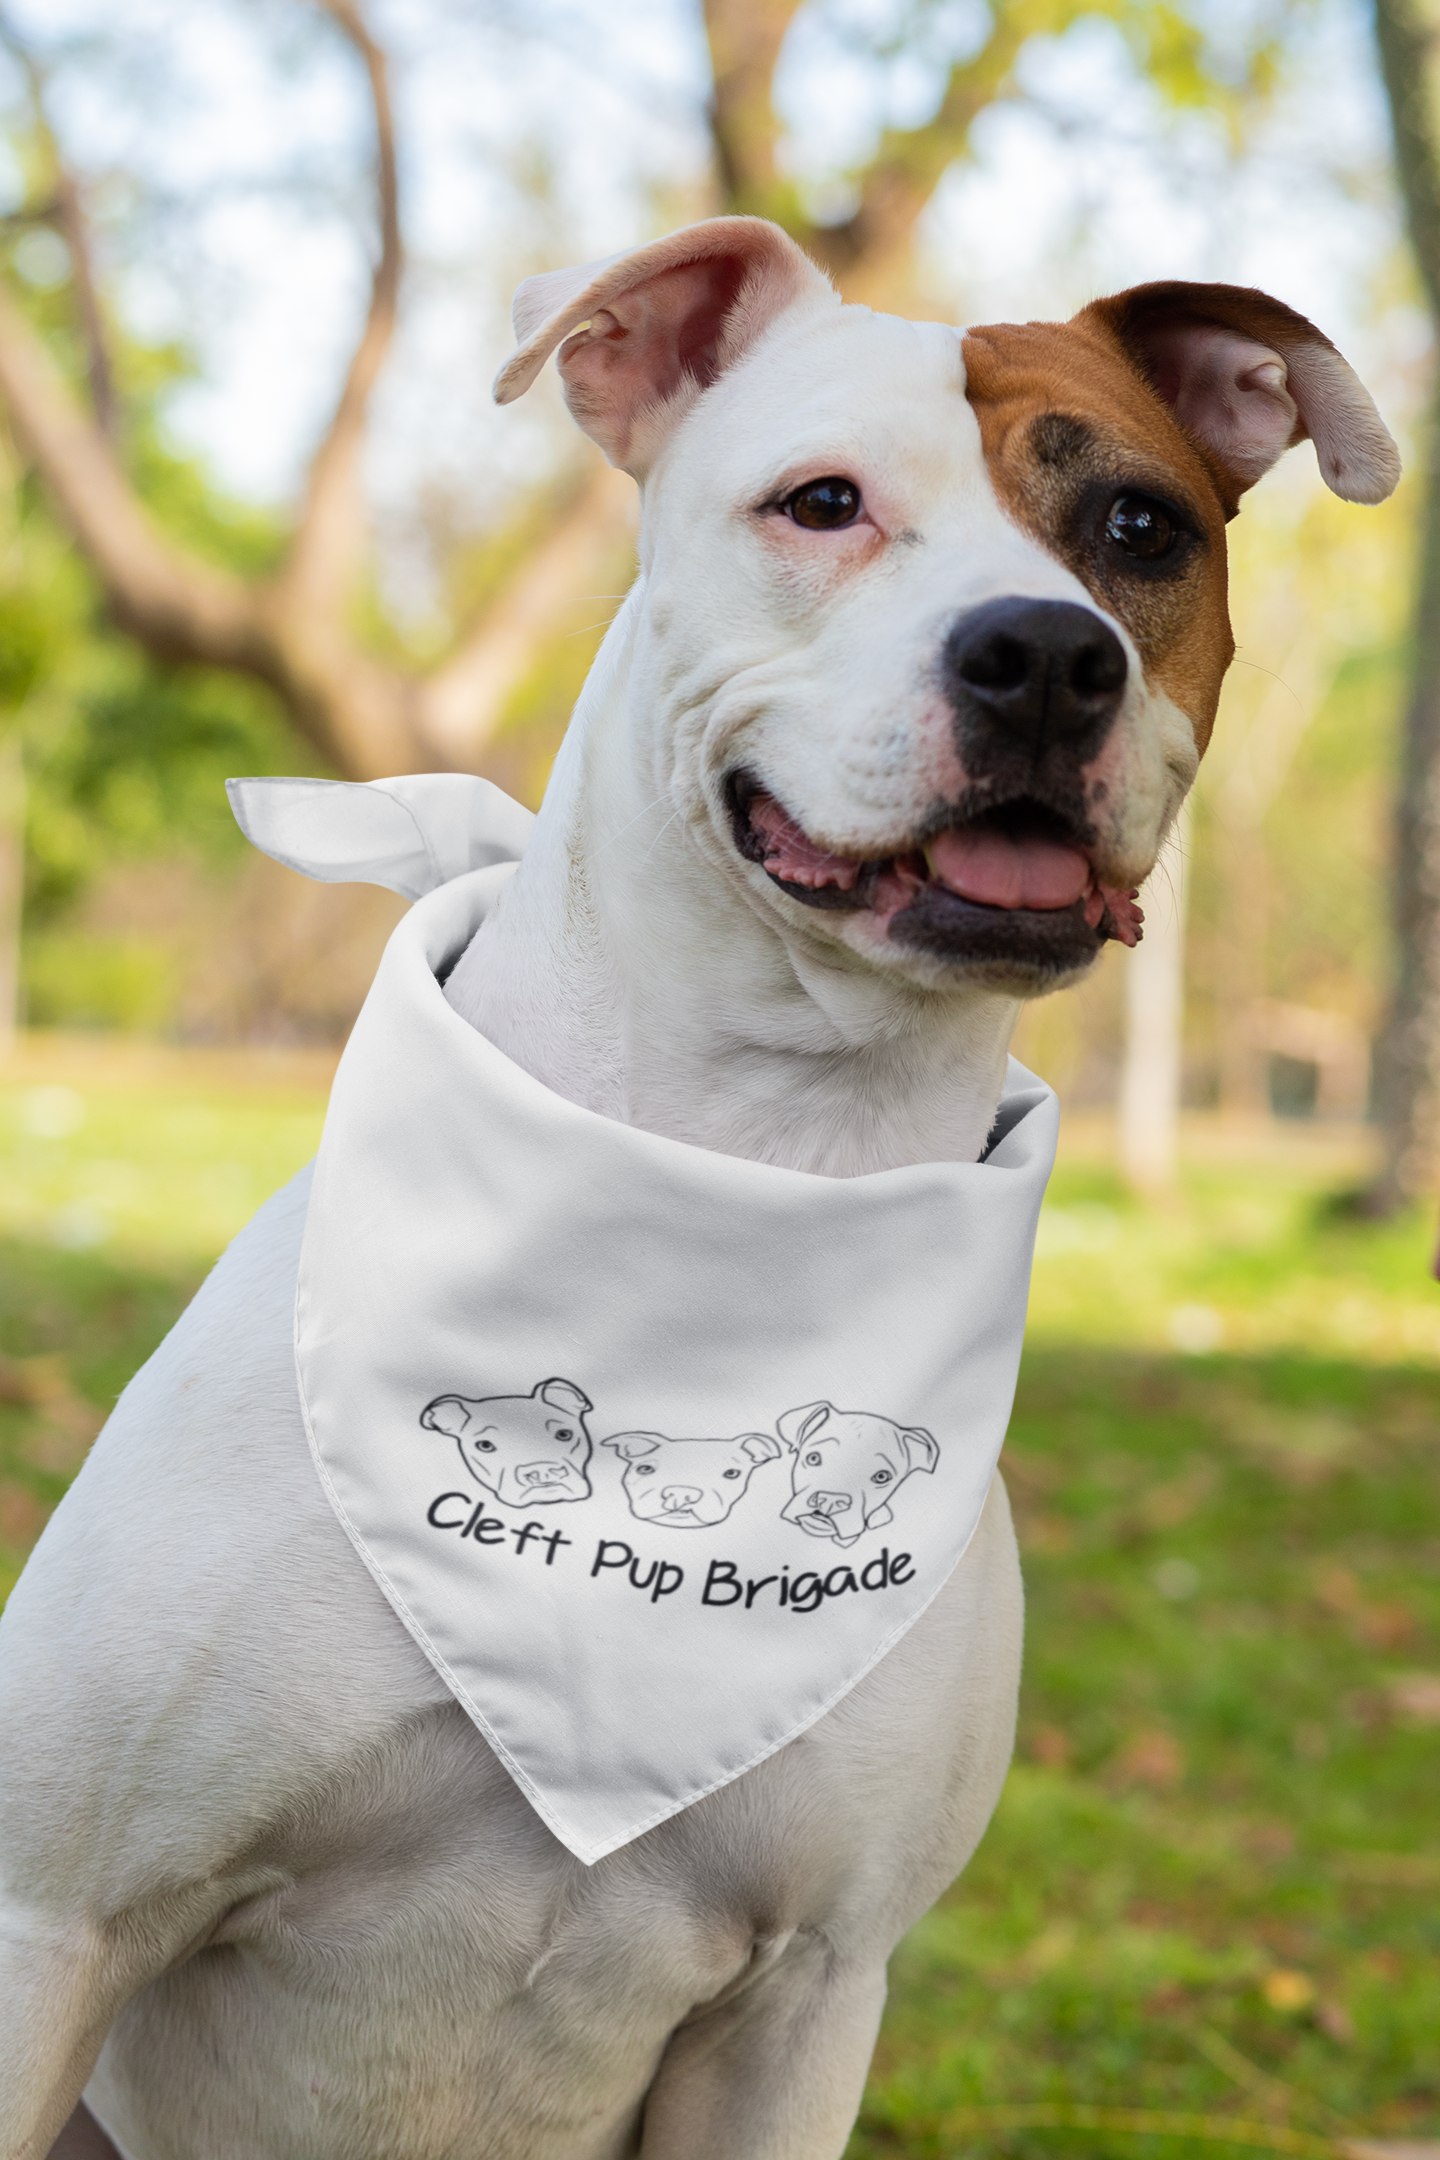 Cleft Pup Brigade Doggie Bandana (available in several designs and colors)